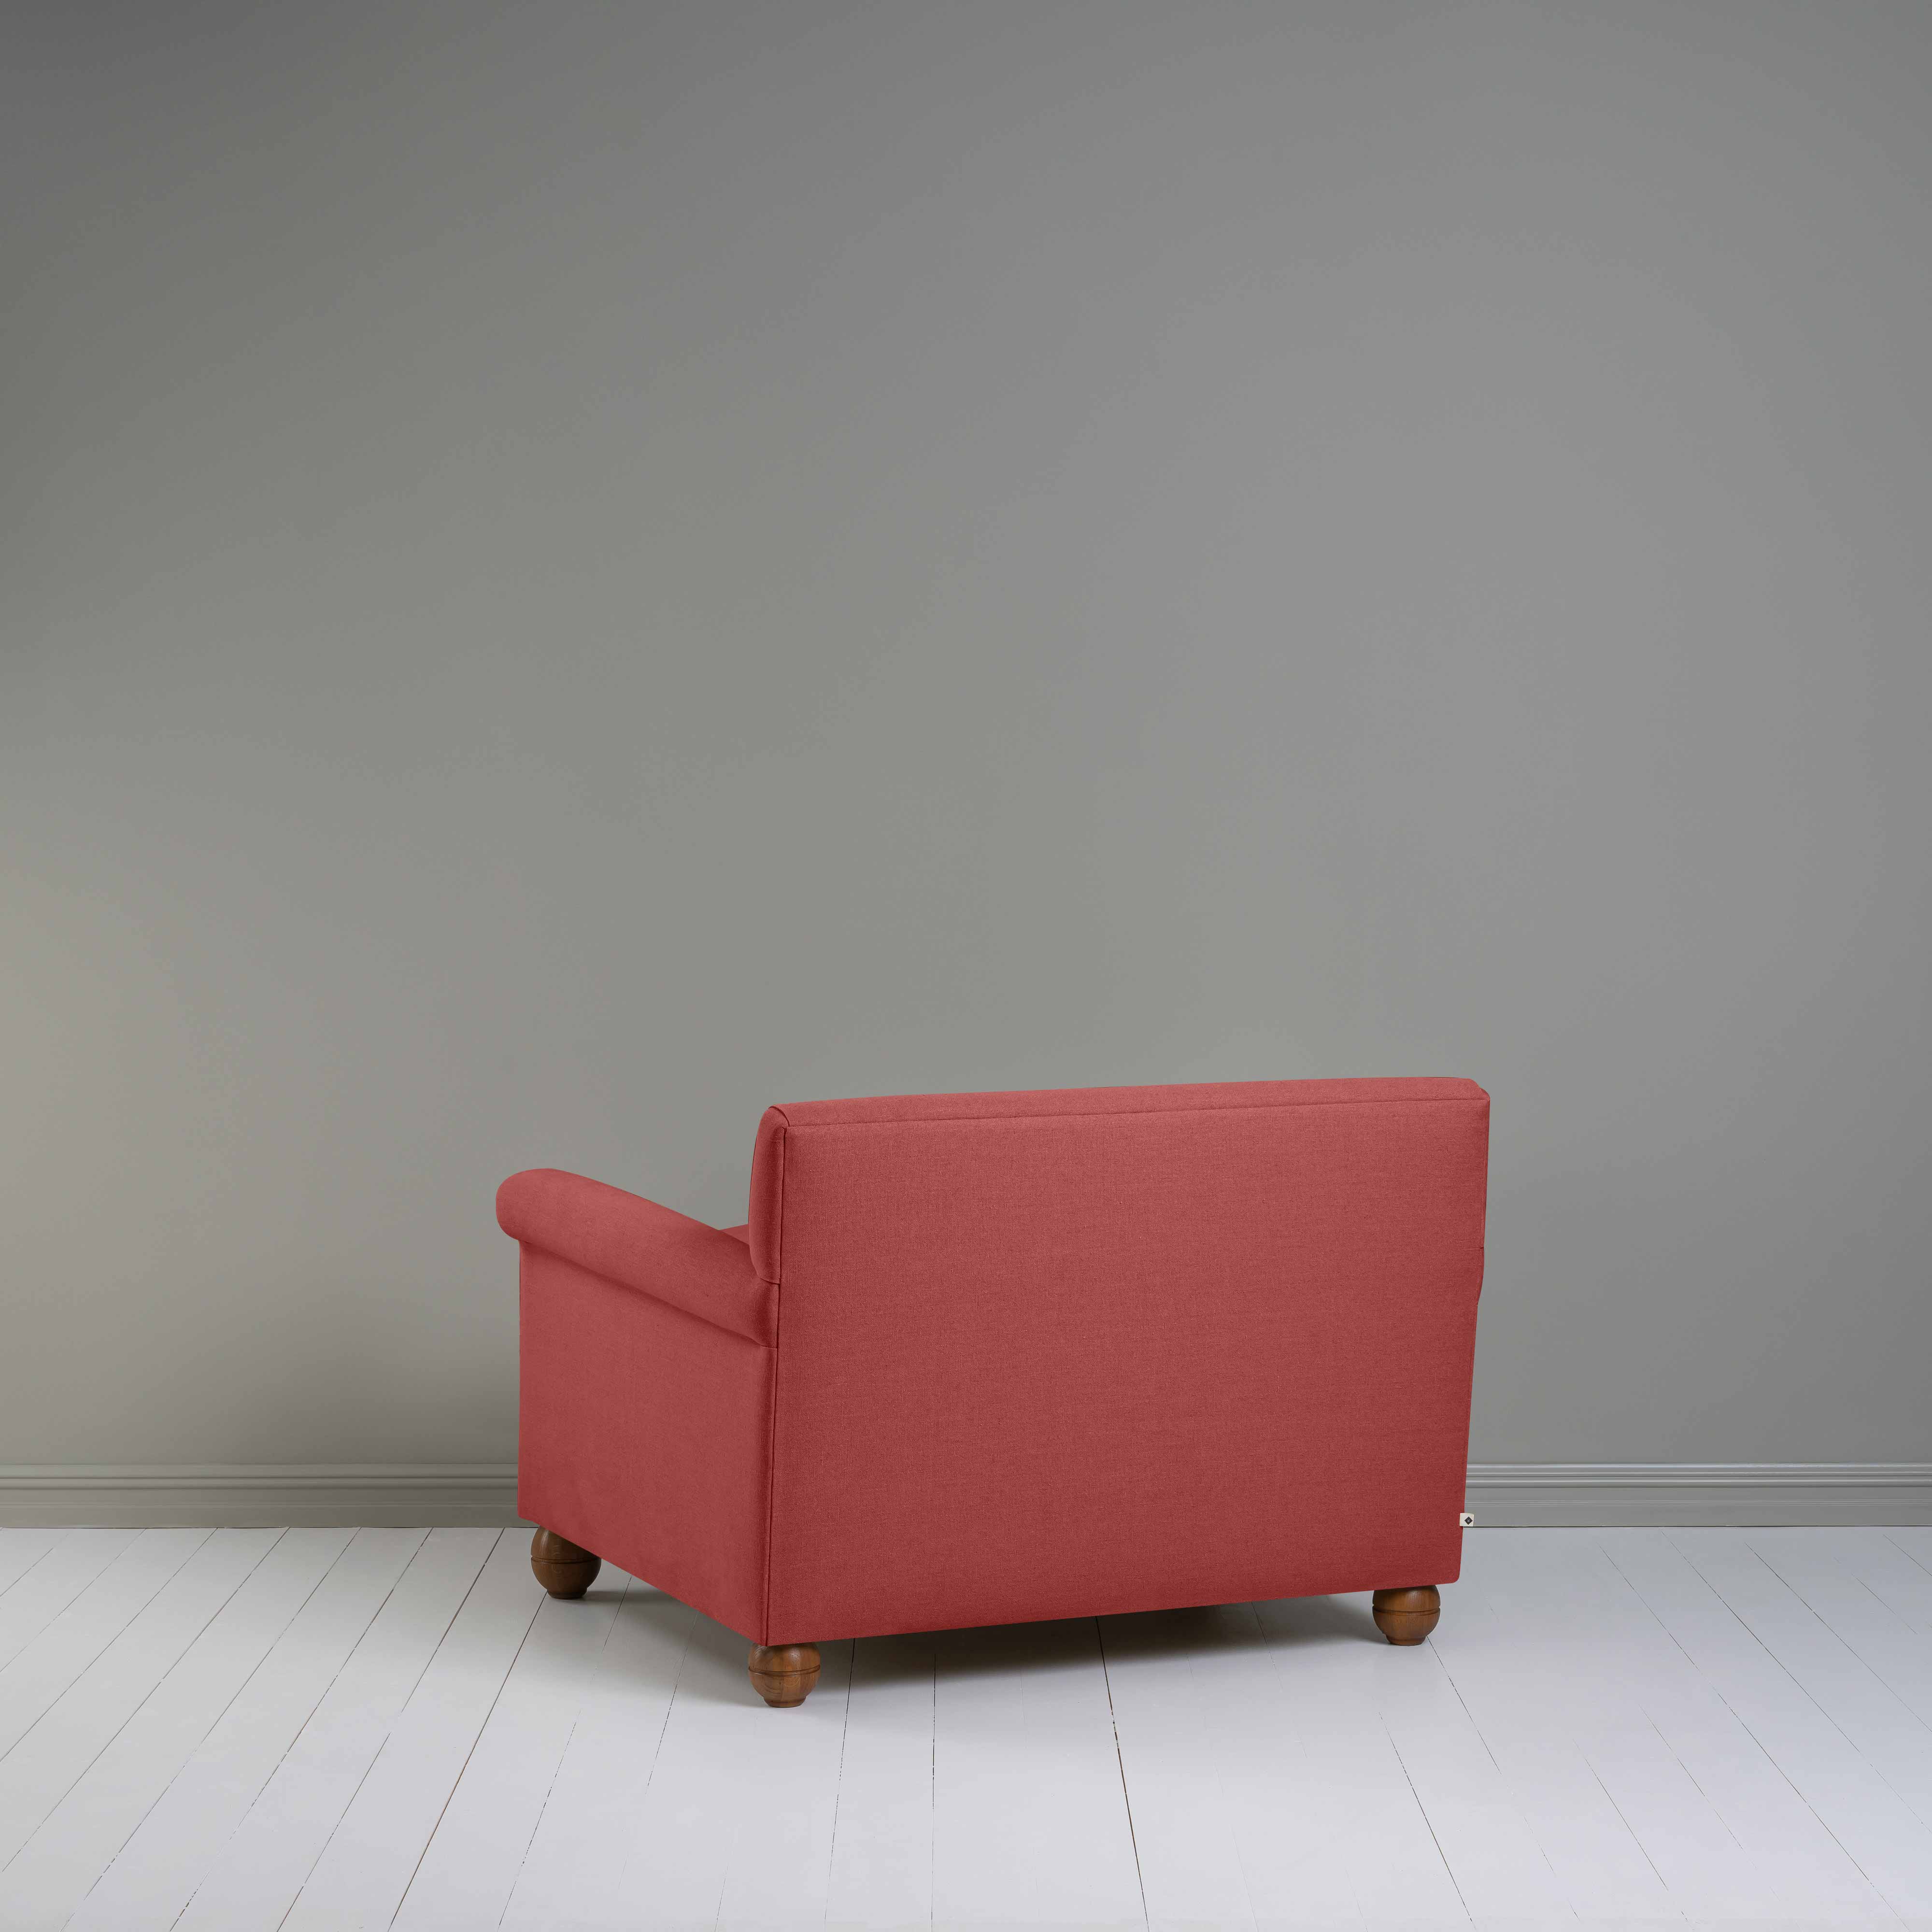  Idler Love Seat in Laidback Linen Rouge 